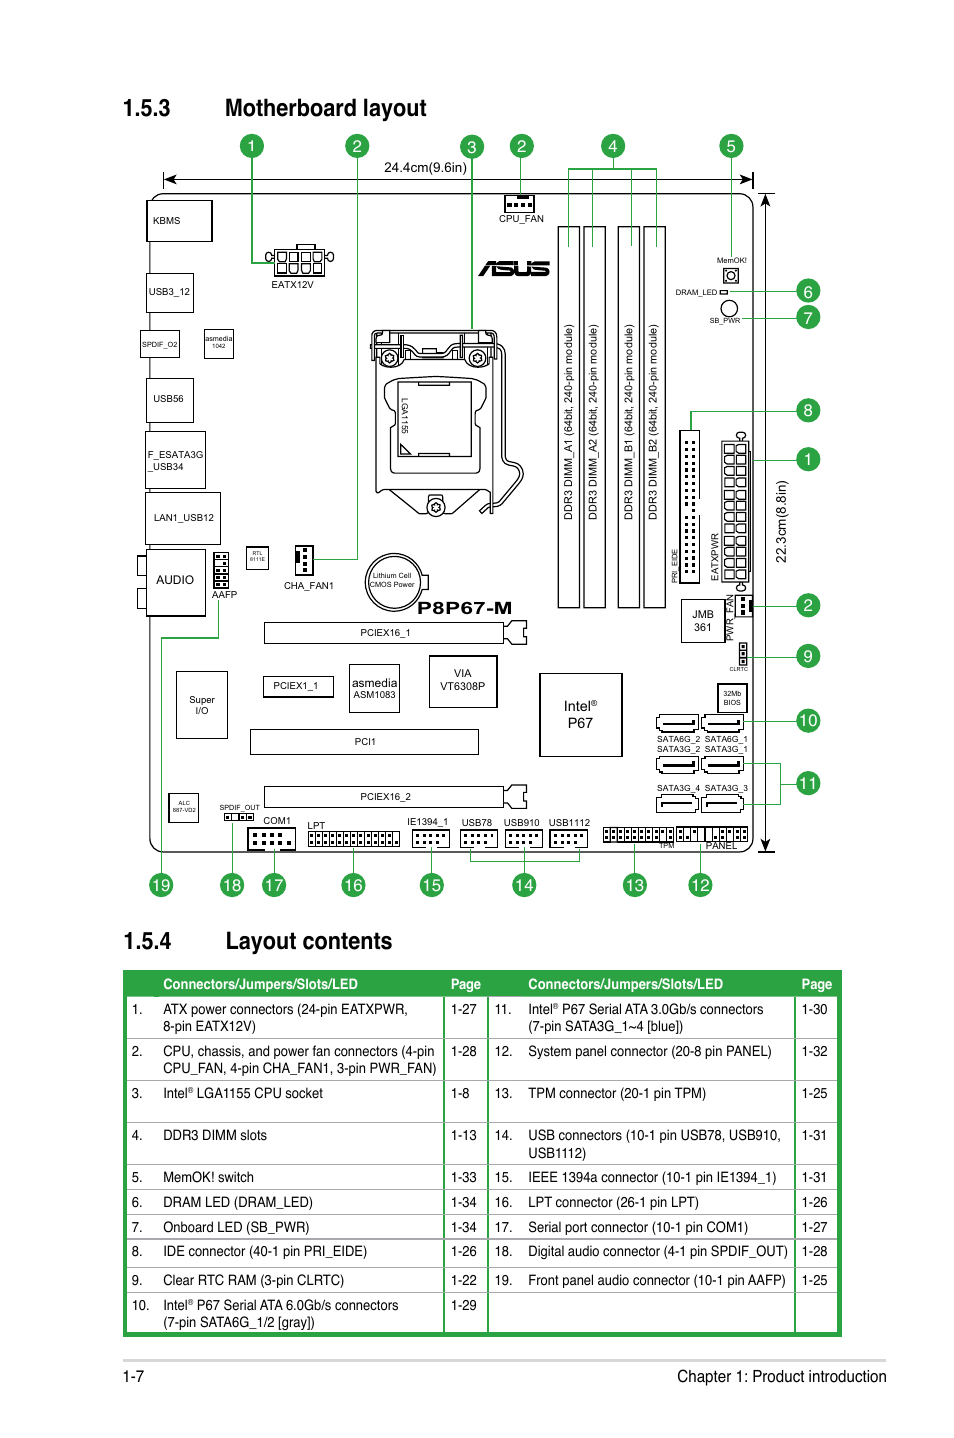 3 motherboard layout, 4 layout contents, Motherboard layout -7 | Asus P8P67-M  User Manual | Page 19 / 80 | Original mode